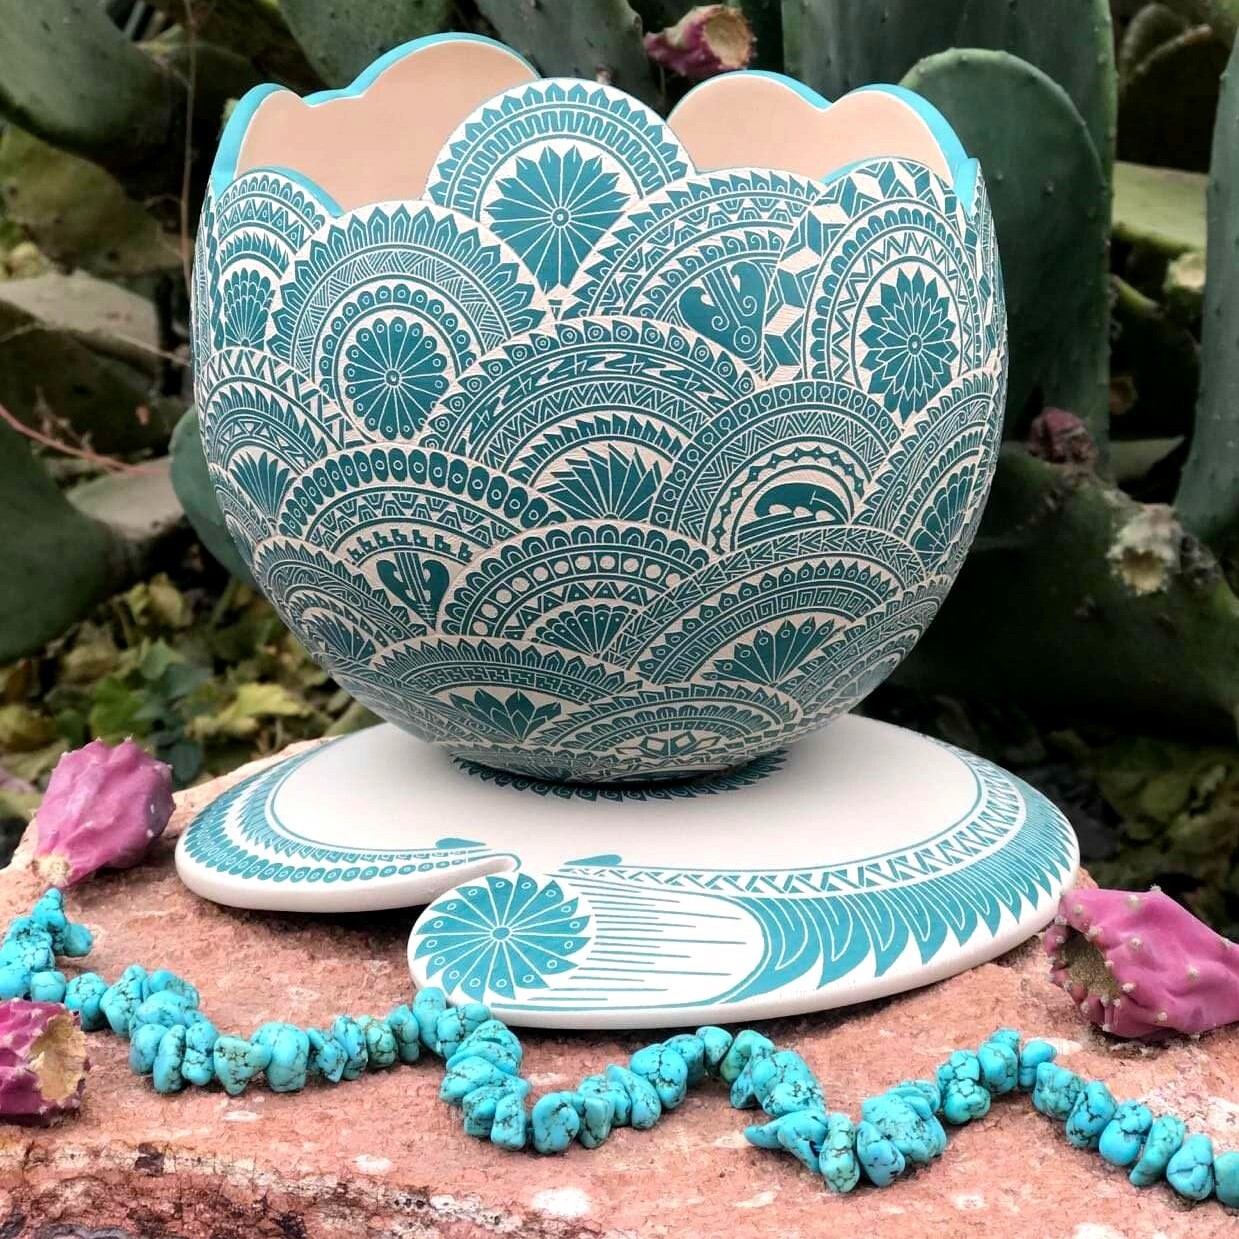 A turquoise and white piece of Mata Ortiz pottery